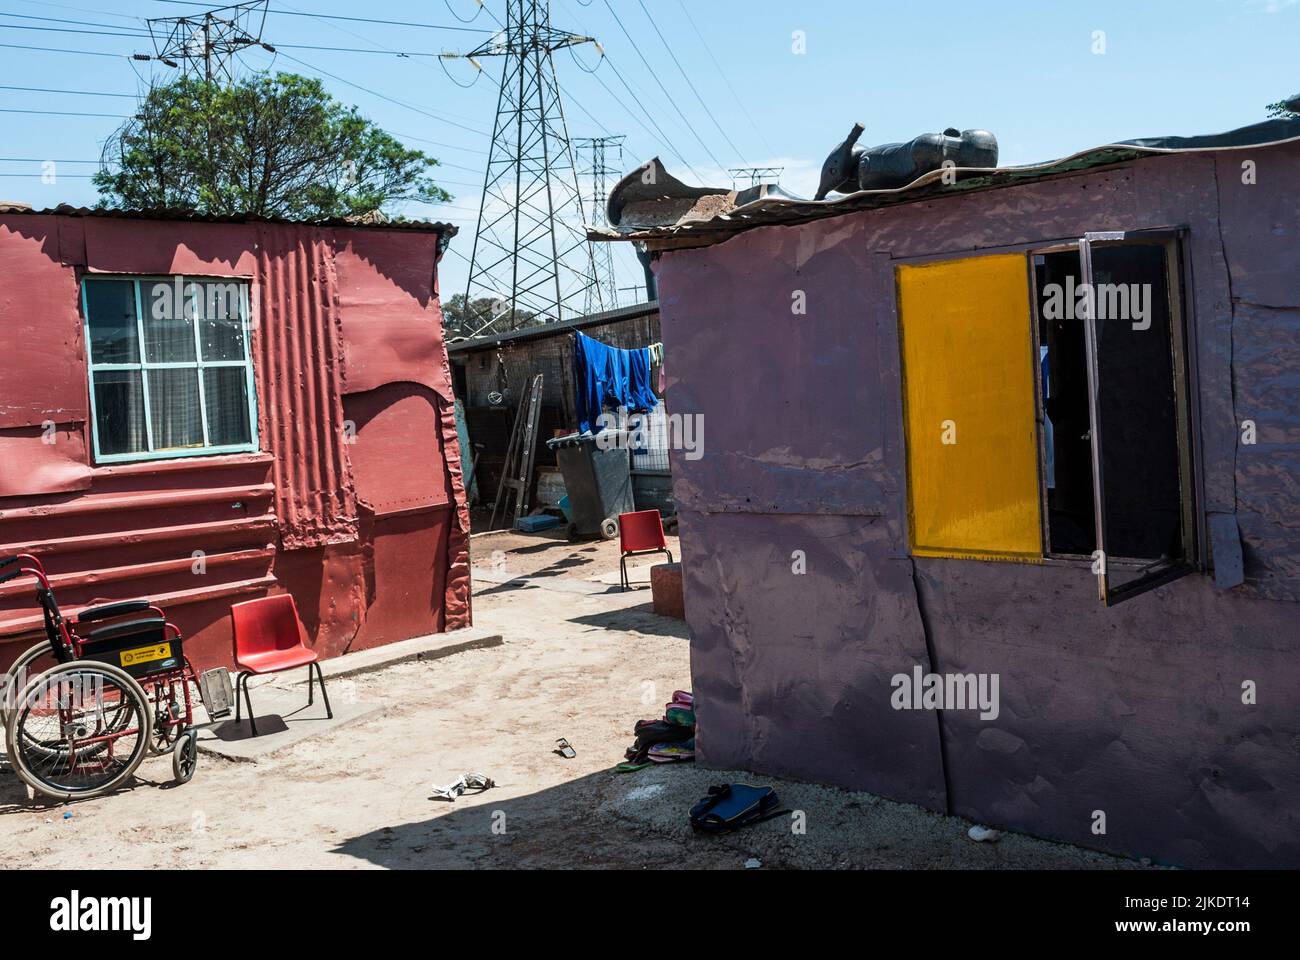 Housing in informal settlement. Orlando West (Soweto), township of Johannesburg, South Africa, Africa. Stock Photo